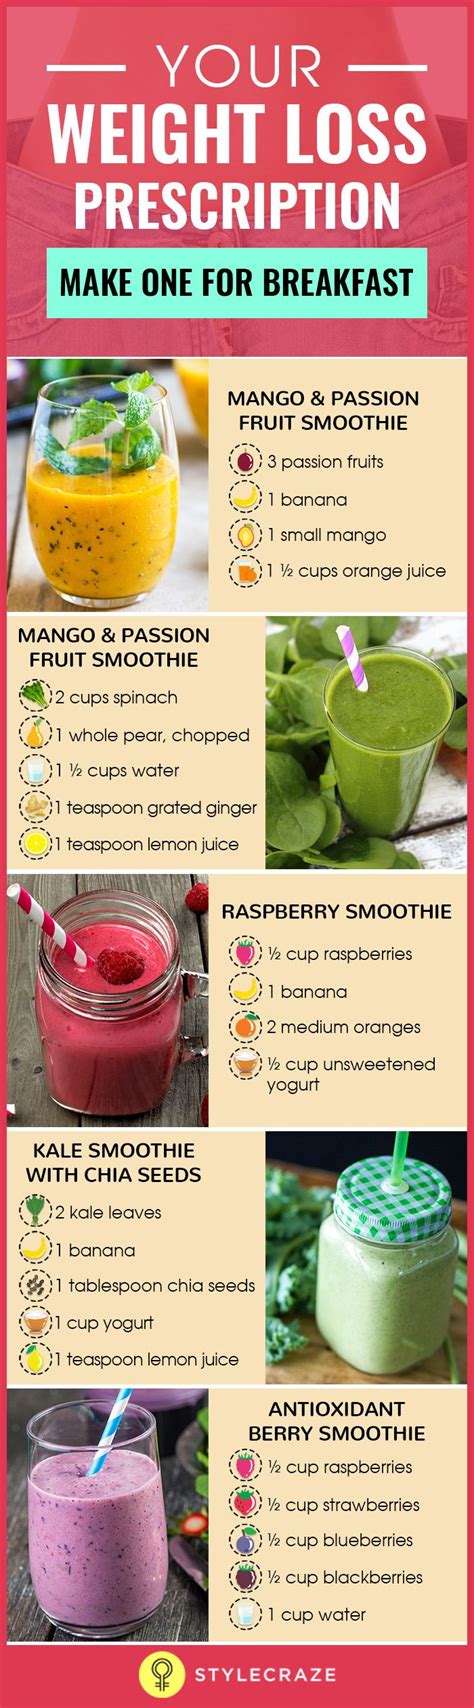 Healthy Smoothie Recipes For Weight Loss That Taste Good Healthy Recipes